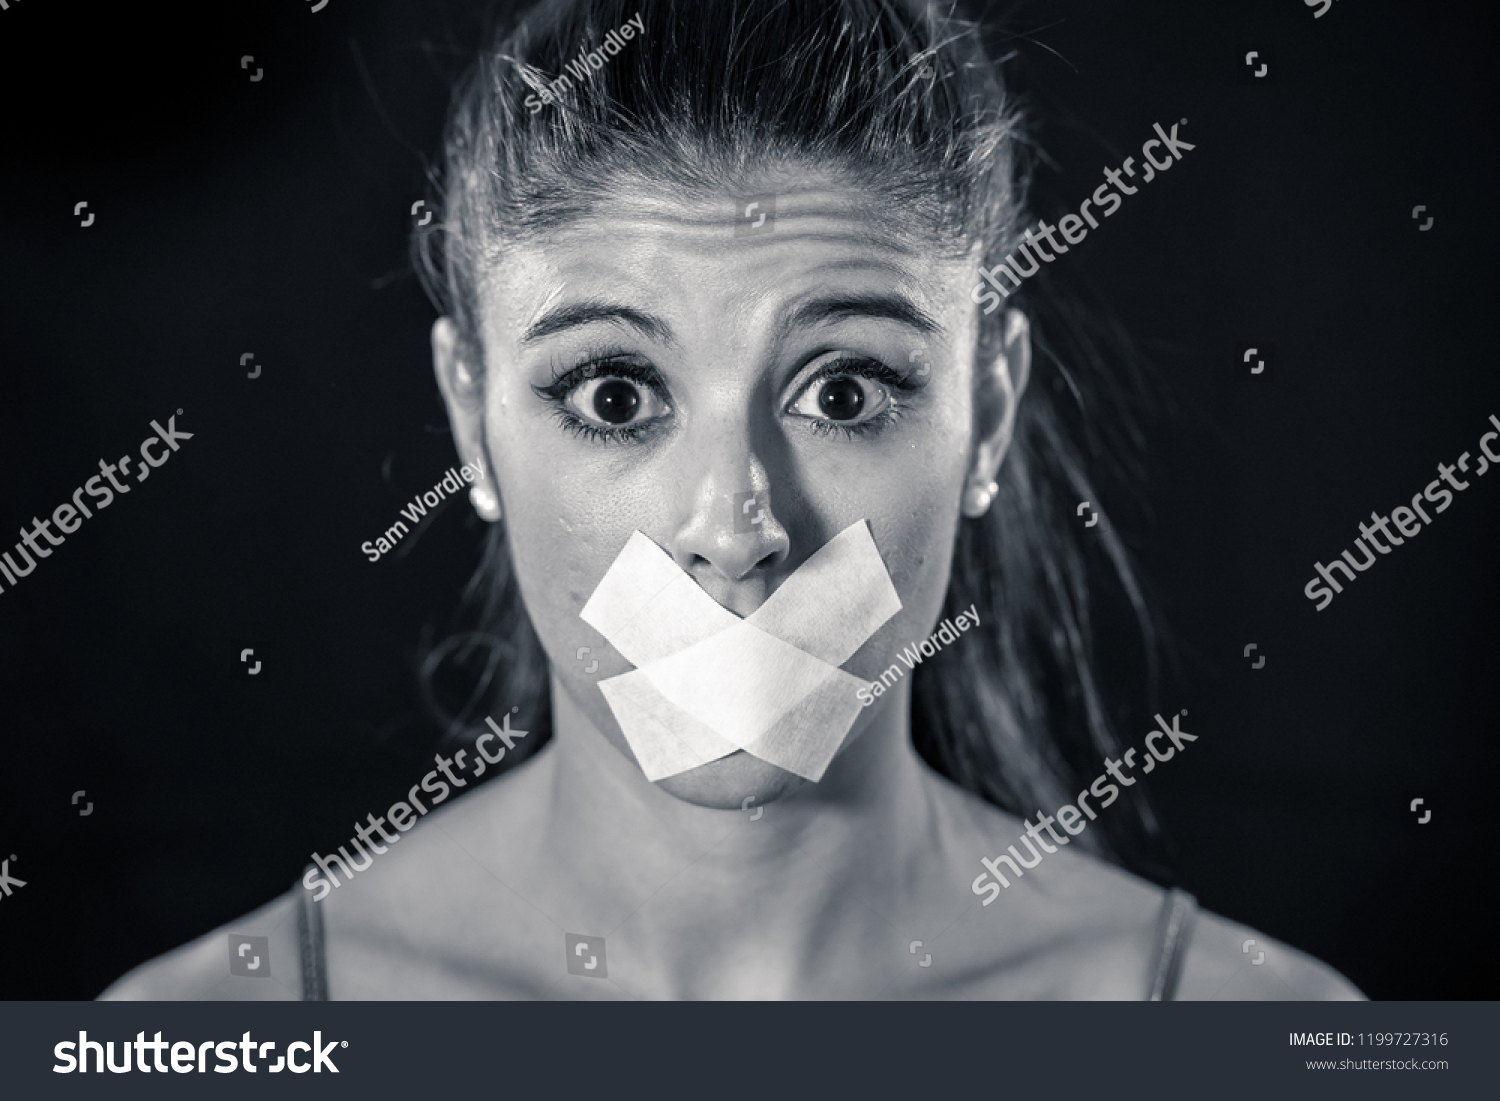 Attractive scared woman with taped mouth making in Silence Abuse Censorship Me too and Freedom of speech Concept Isolated on black background. #1199727316